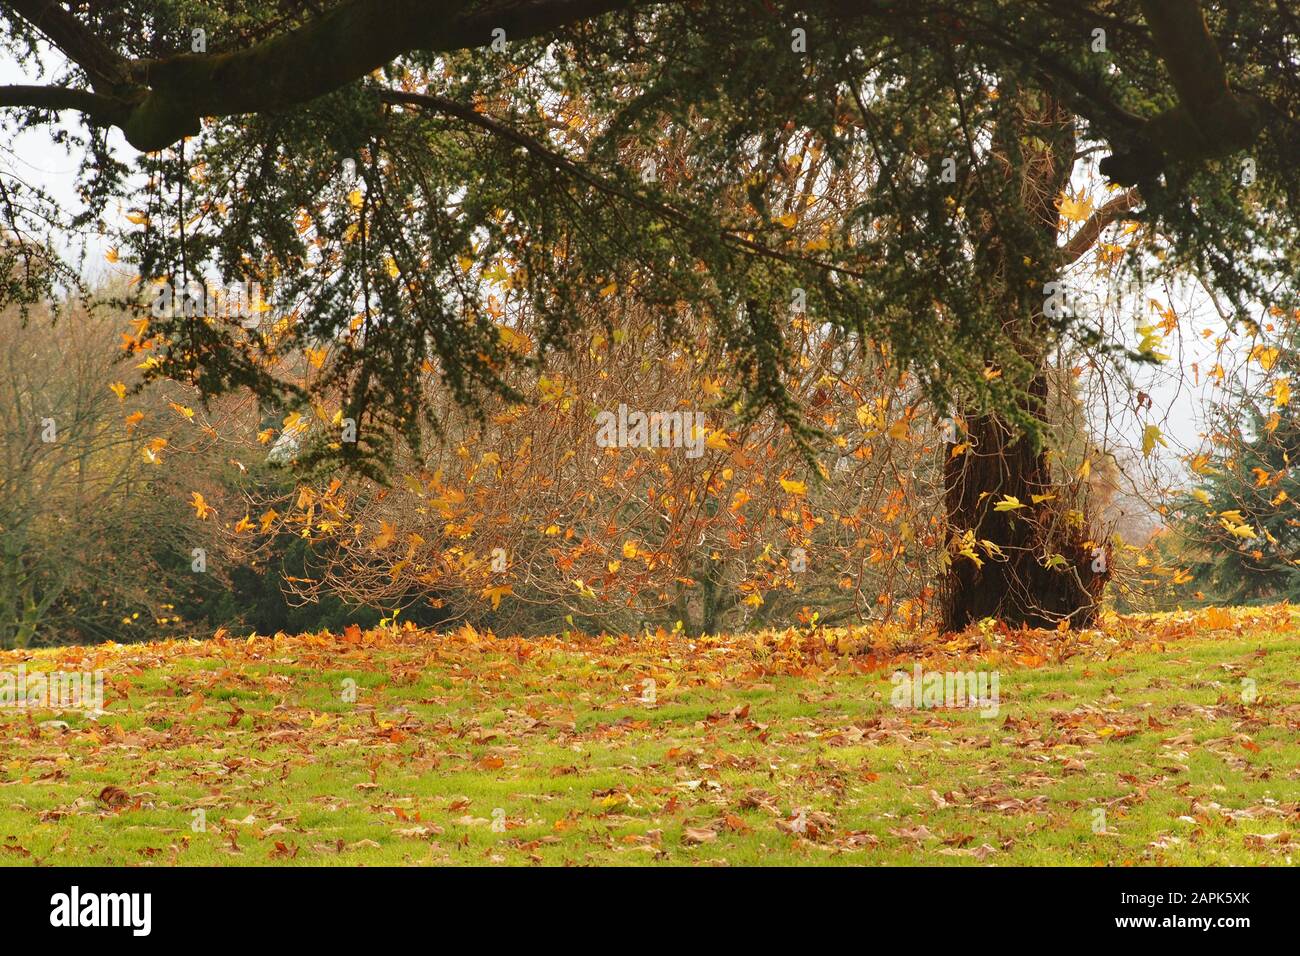 An autumn garden view looking across grass through trees with their autumn colours and leaves on the grass underneath Stock Photo